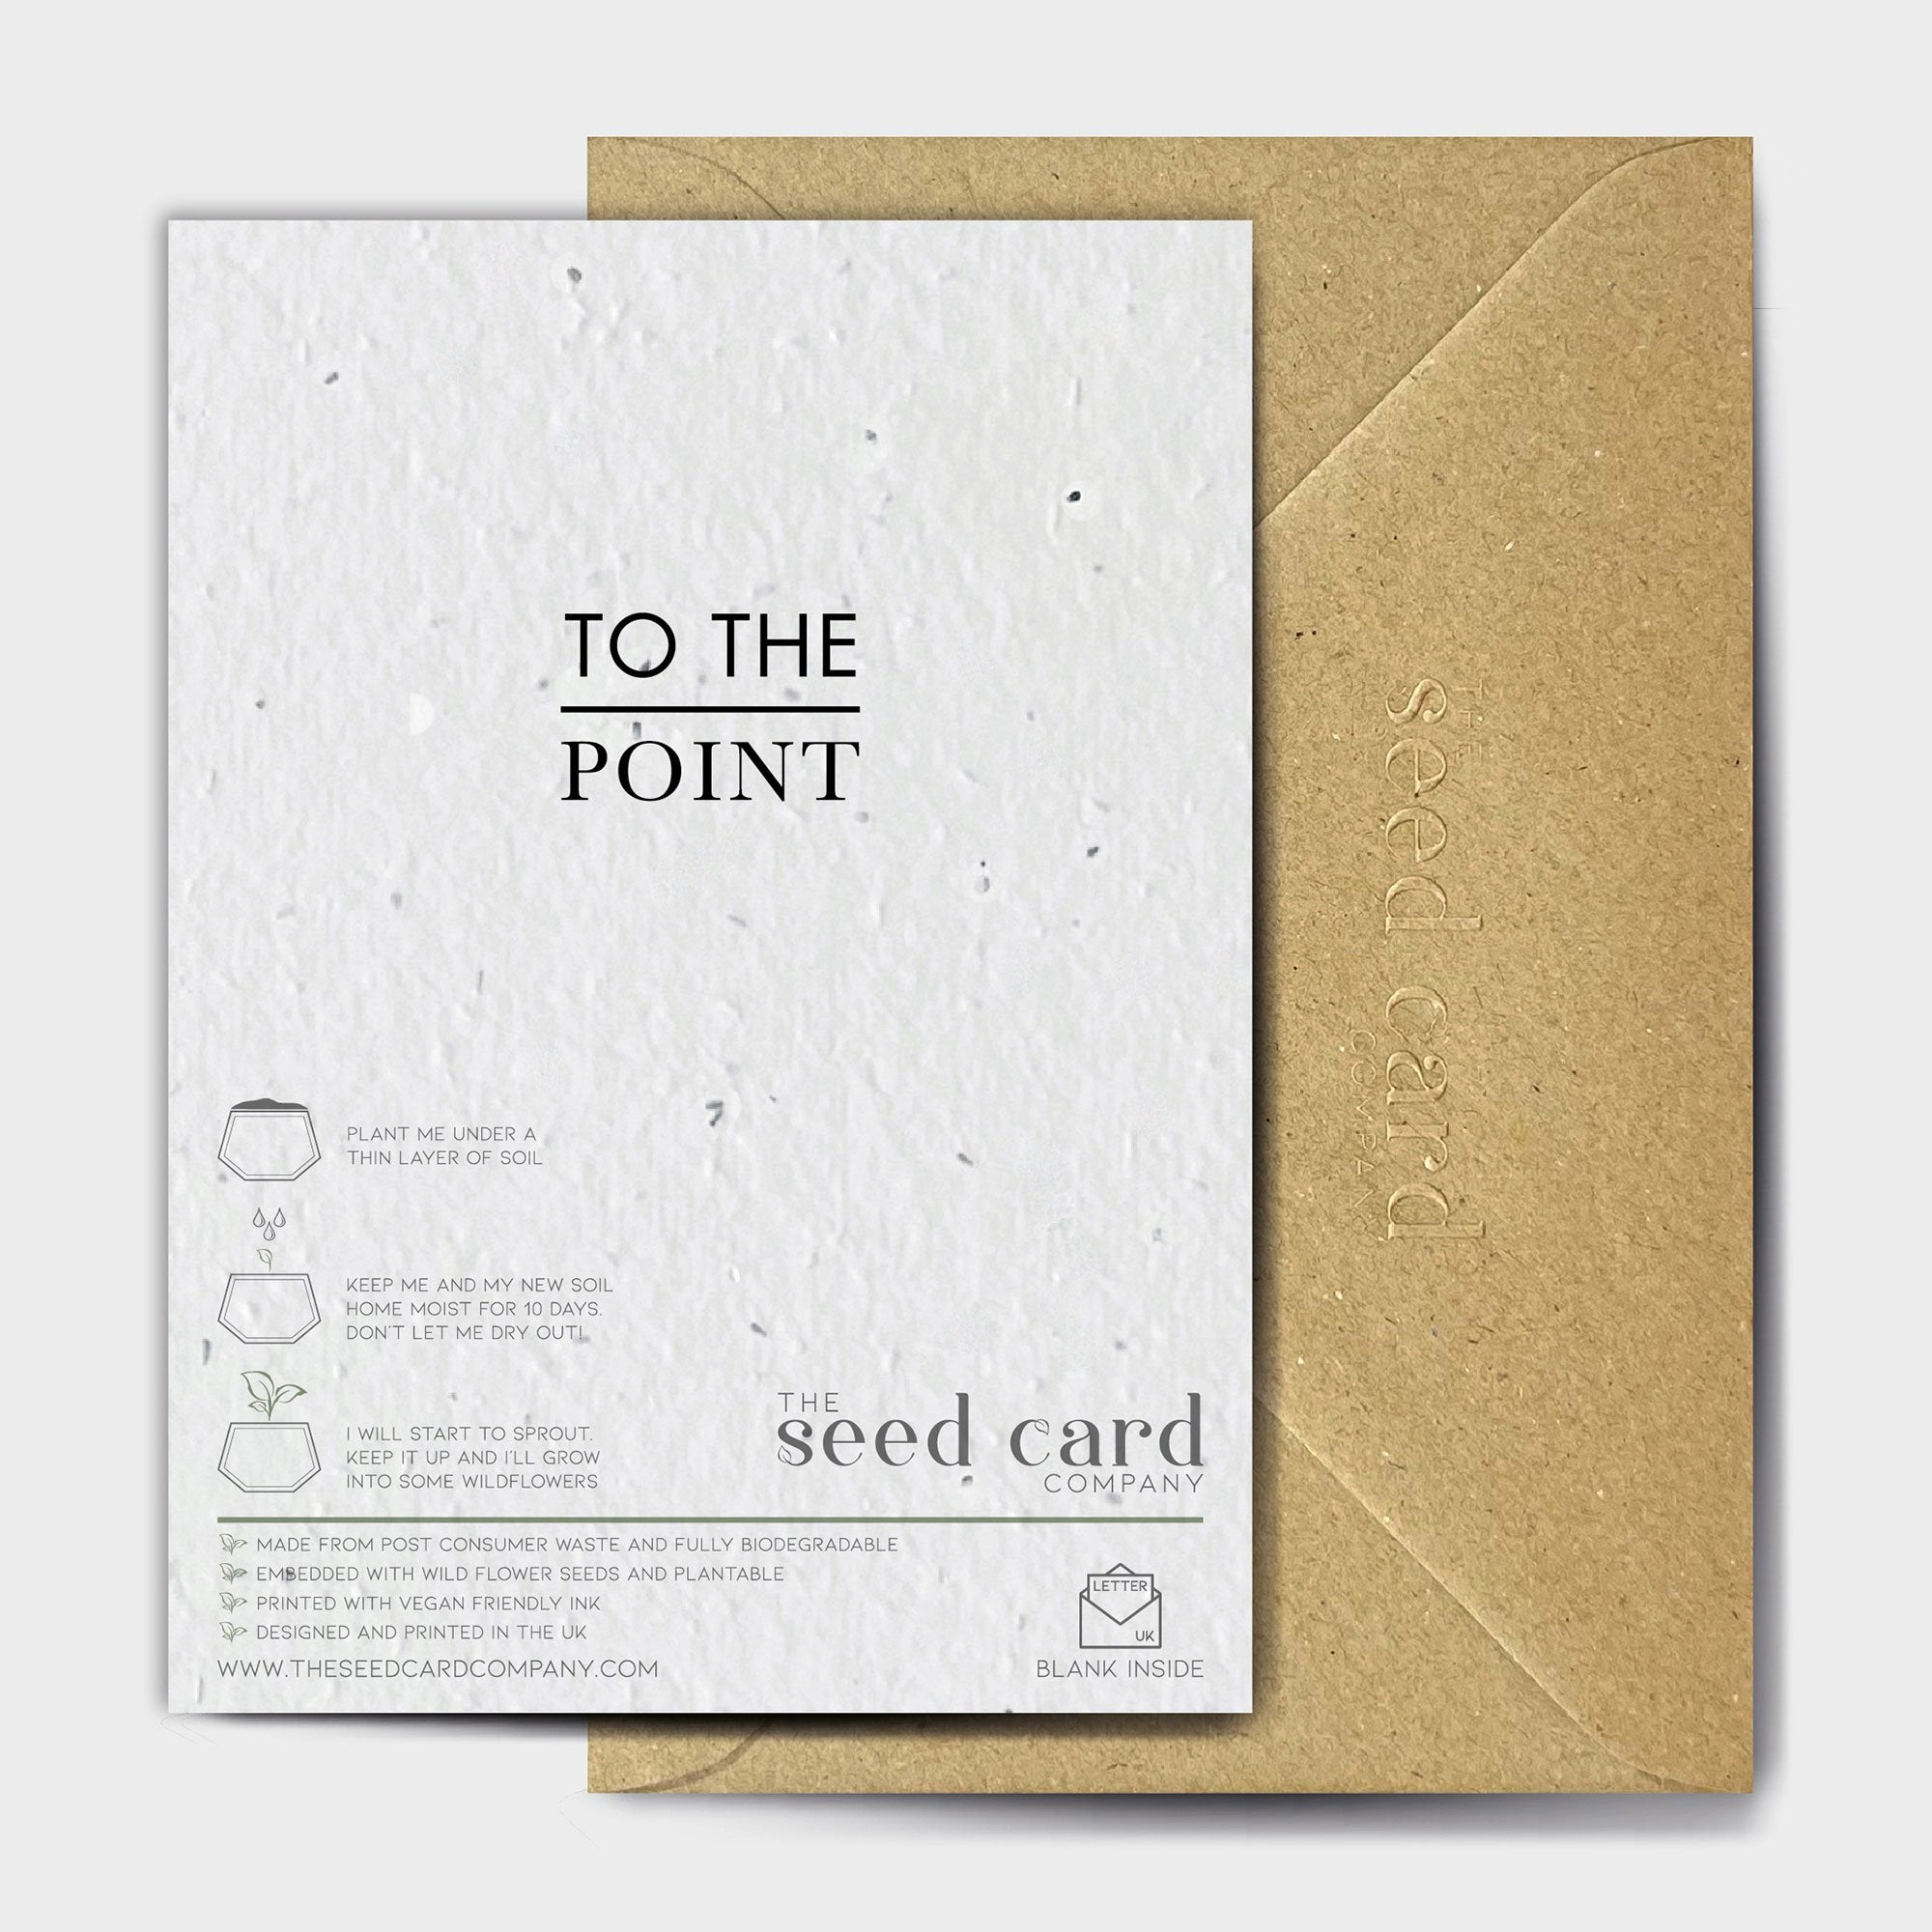 Shop online Congrats Old Person - 100% biodegradable seed-embedded cards Shop -The Seed Card Company